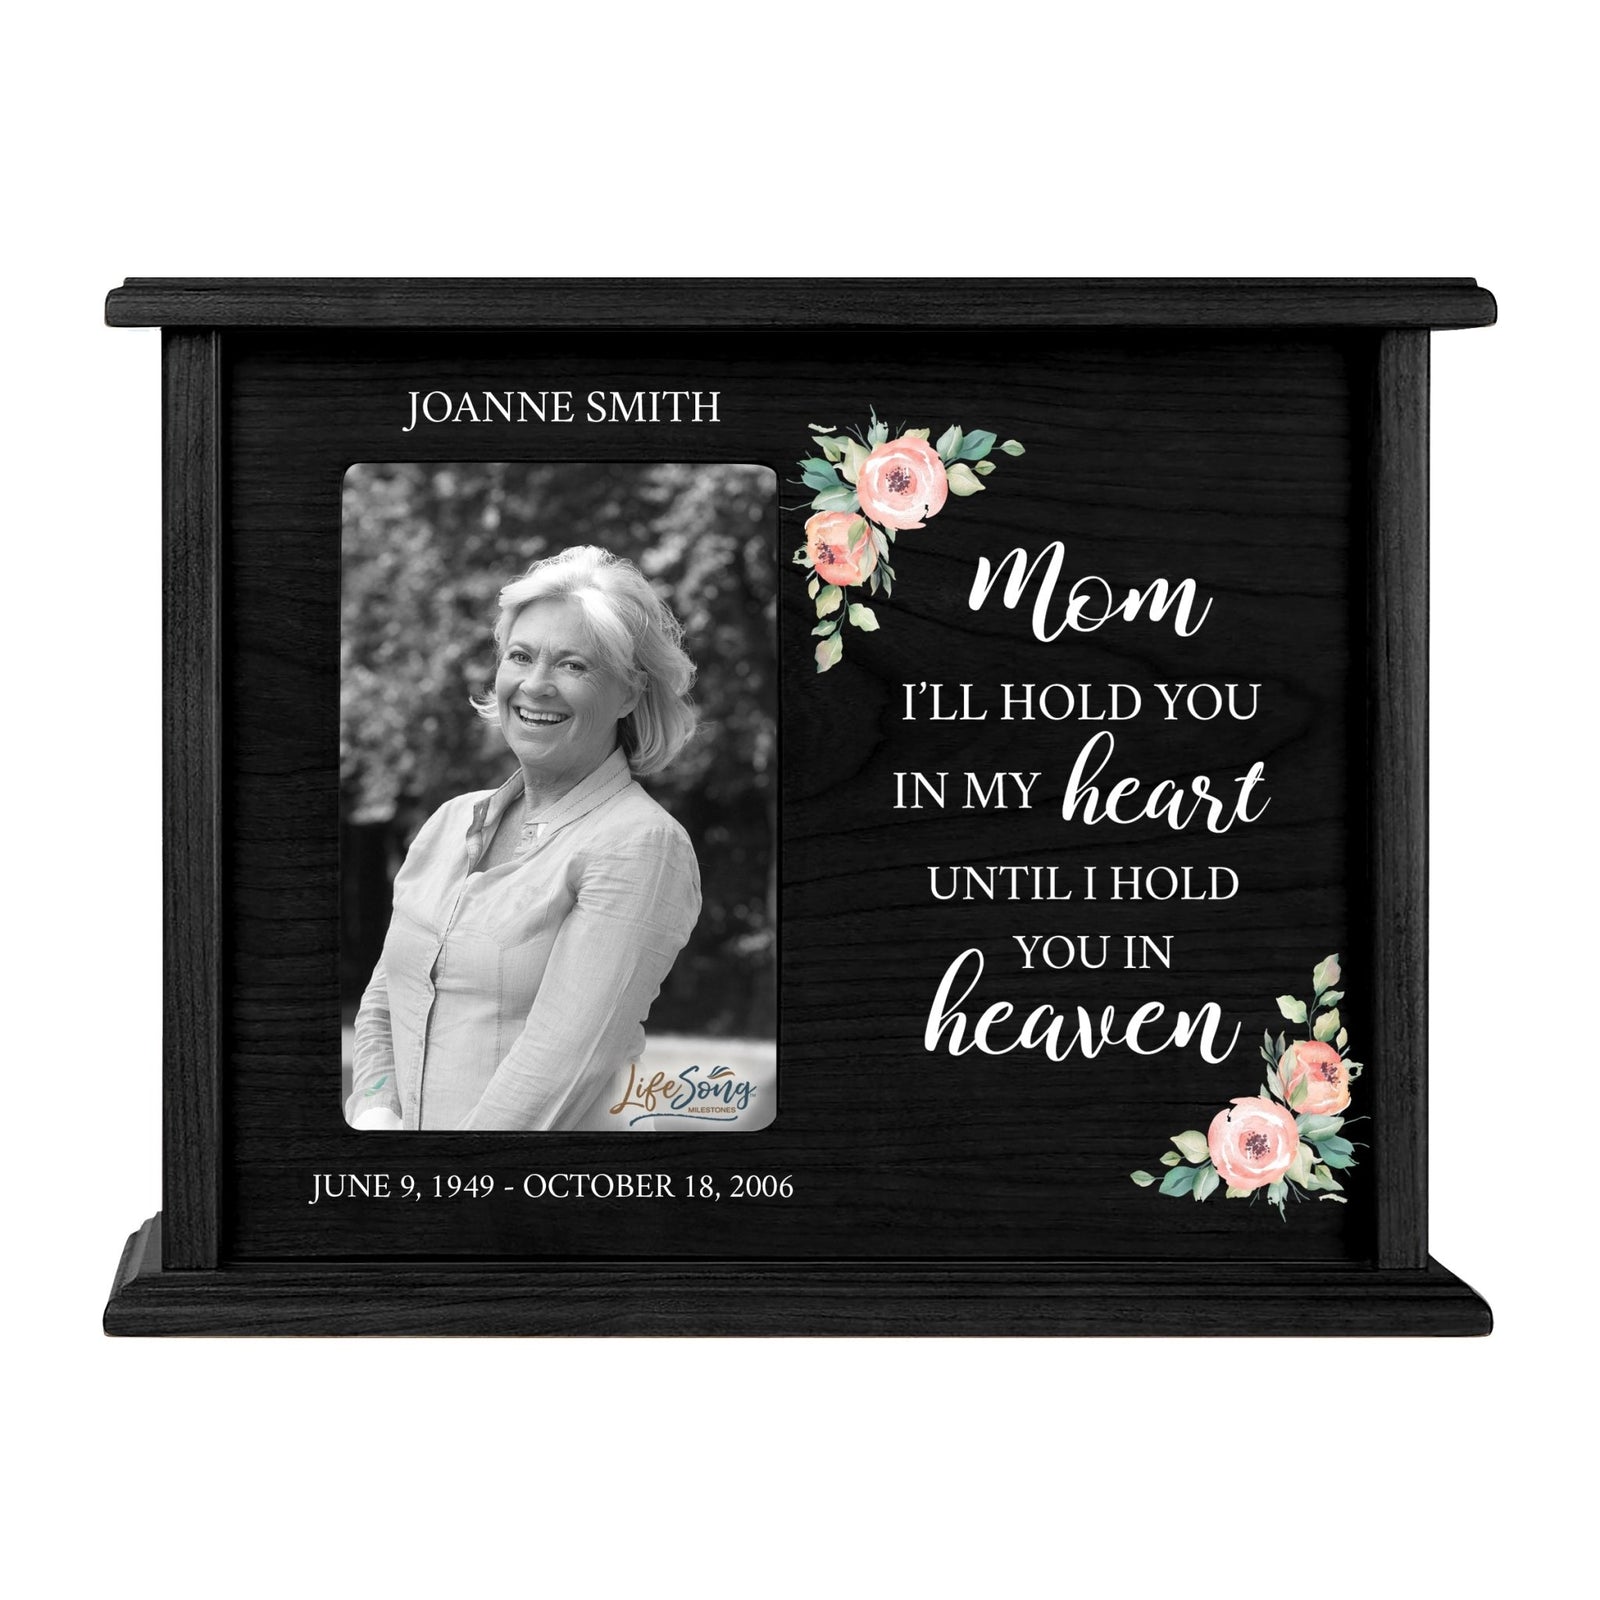 Personalized Memorial Cherry Wood 12 x 4.5 x 9 Cremation Urn Box with Picture Frame holds 200 cu in of Human Ashes and 4x6 Photo - I’ll Hold You In My Heart (Black) - LifeSong Milestones